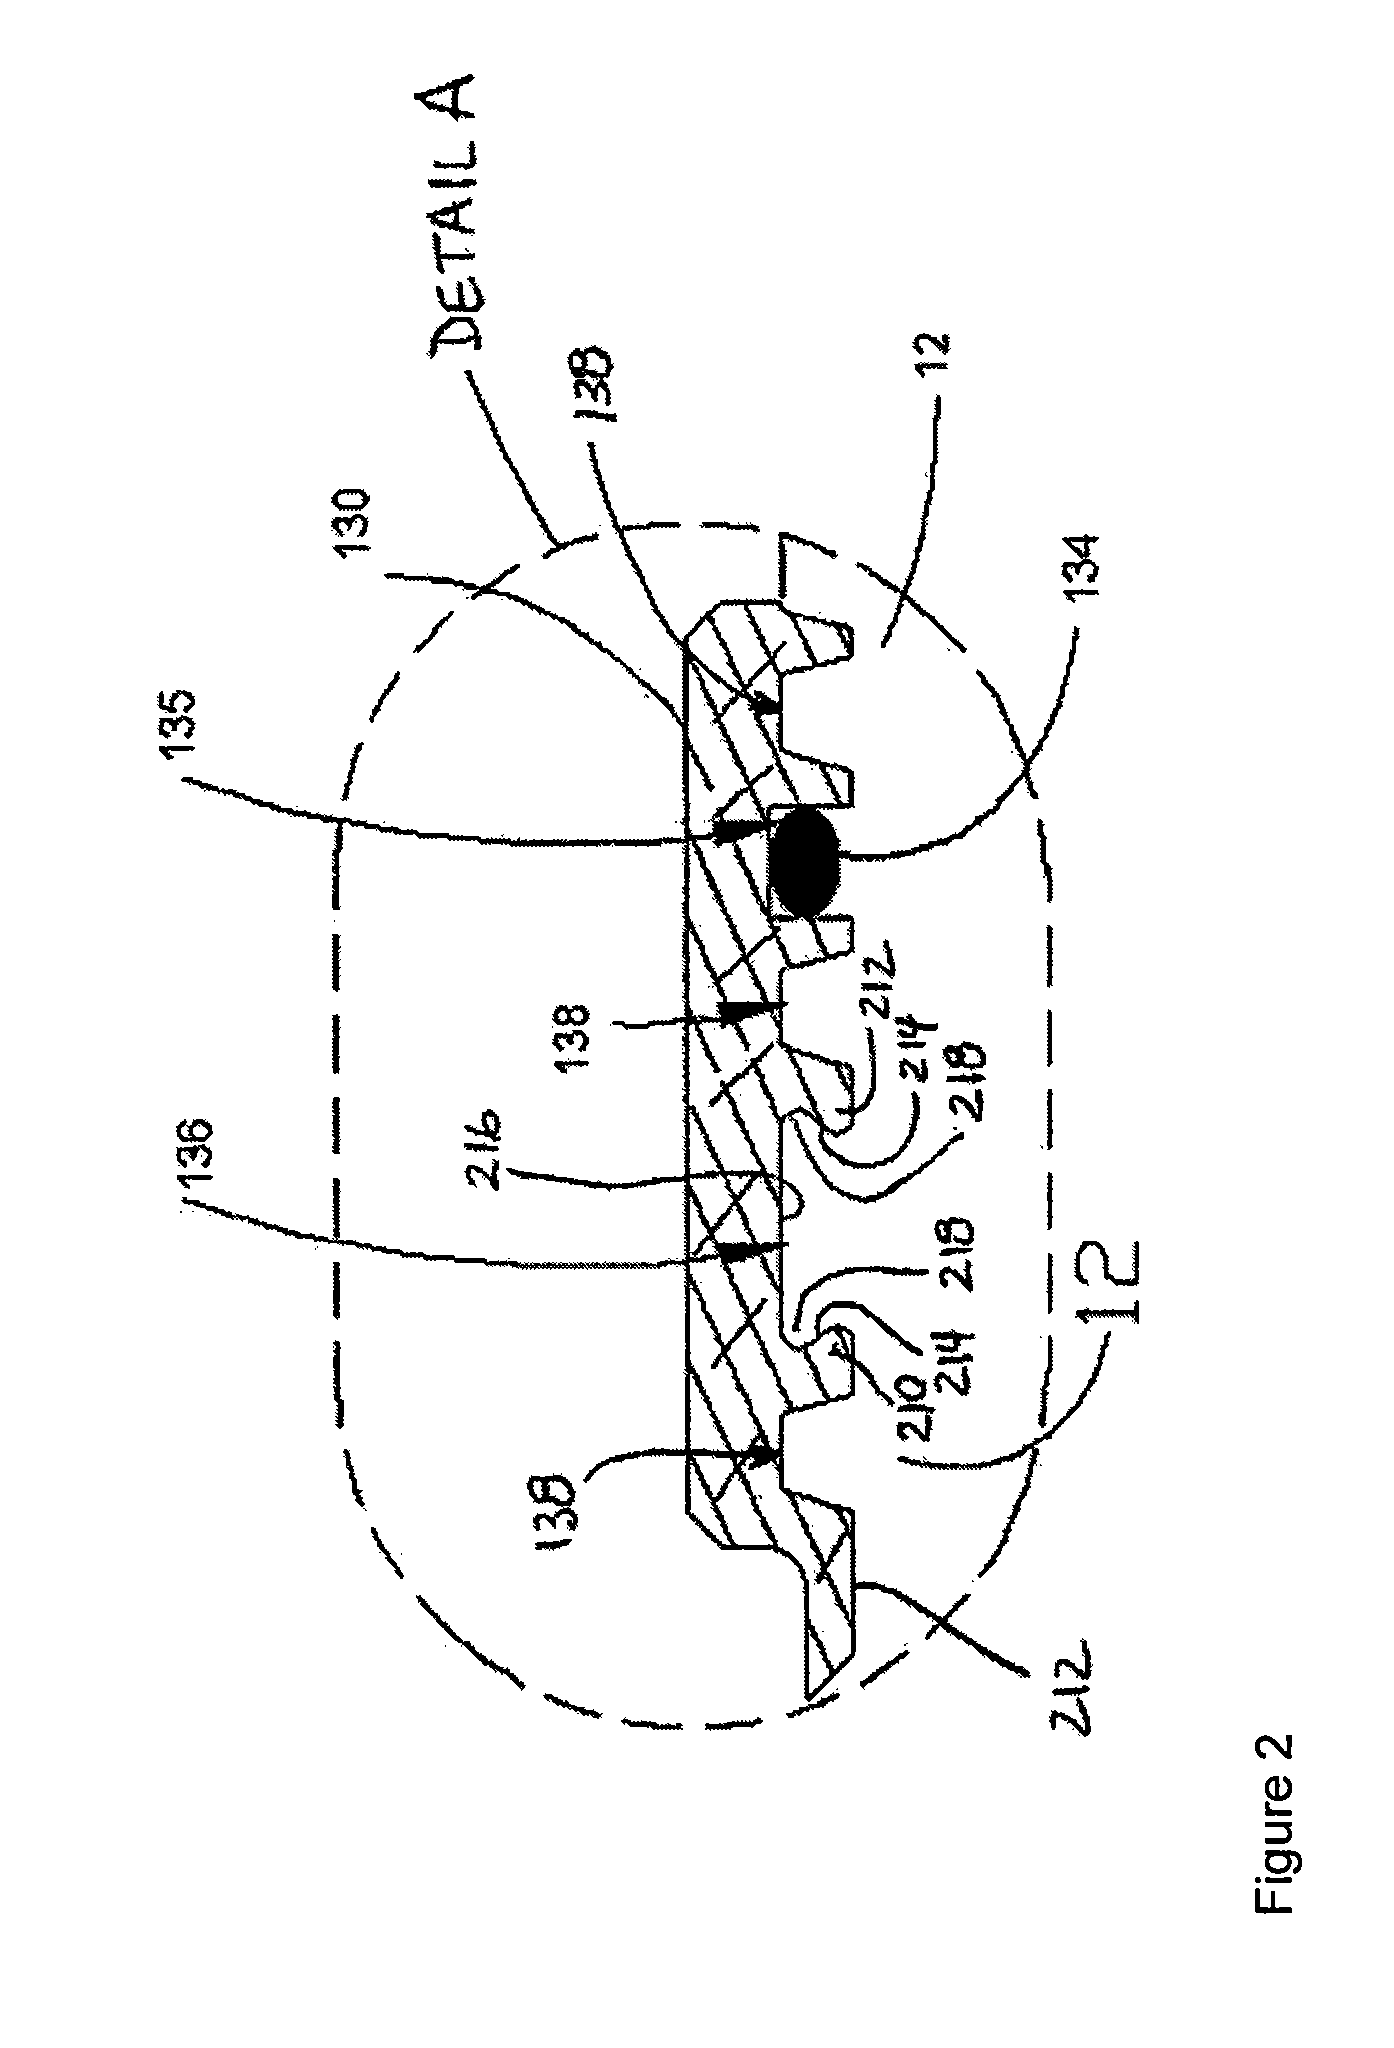 Acid-catalyzed dielectric enhancement fluid and cable restoration method employing same